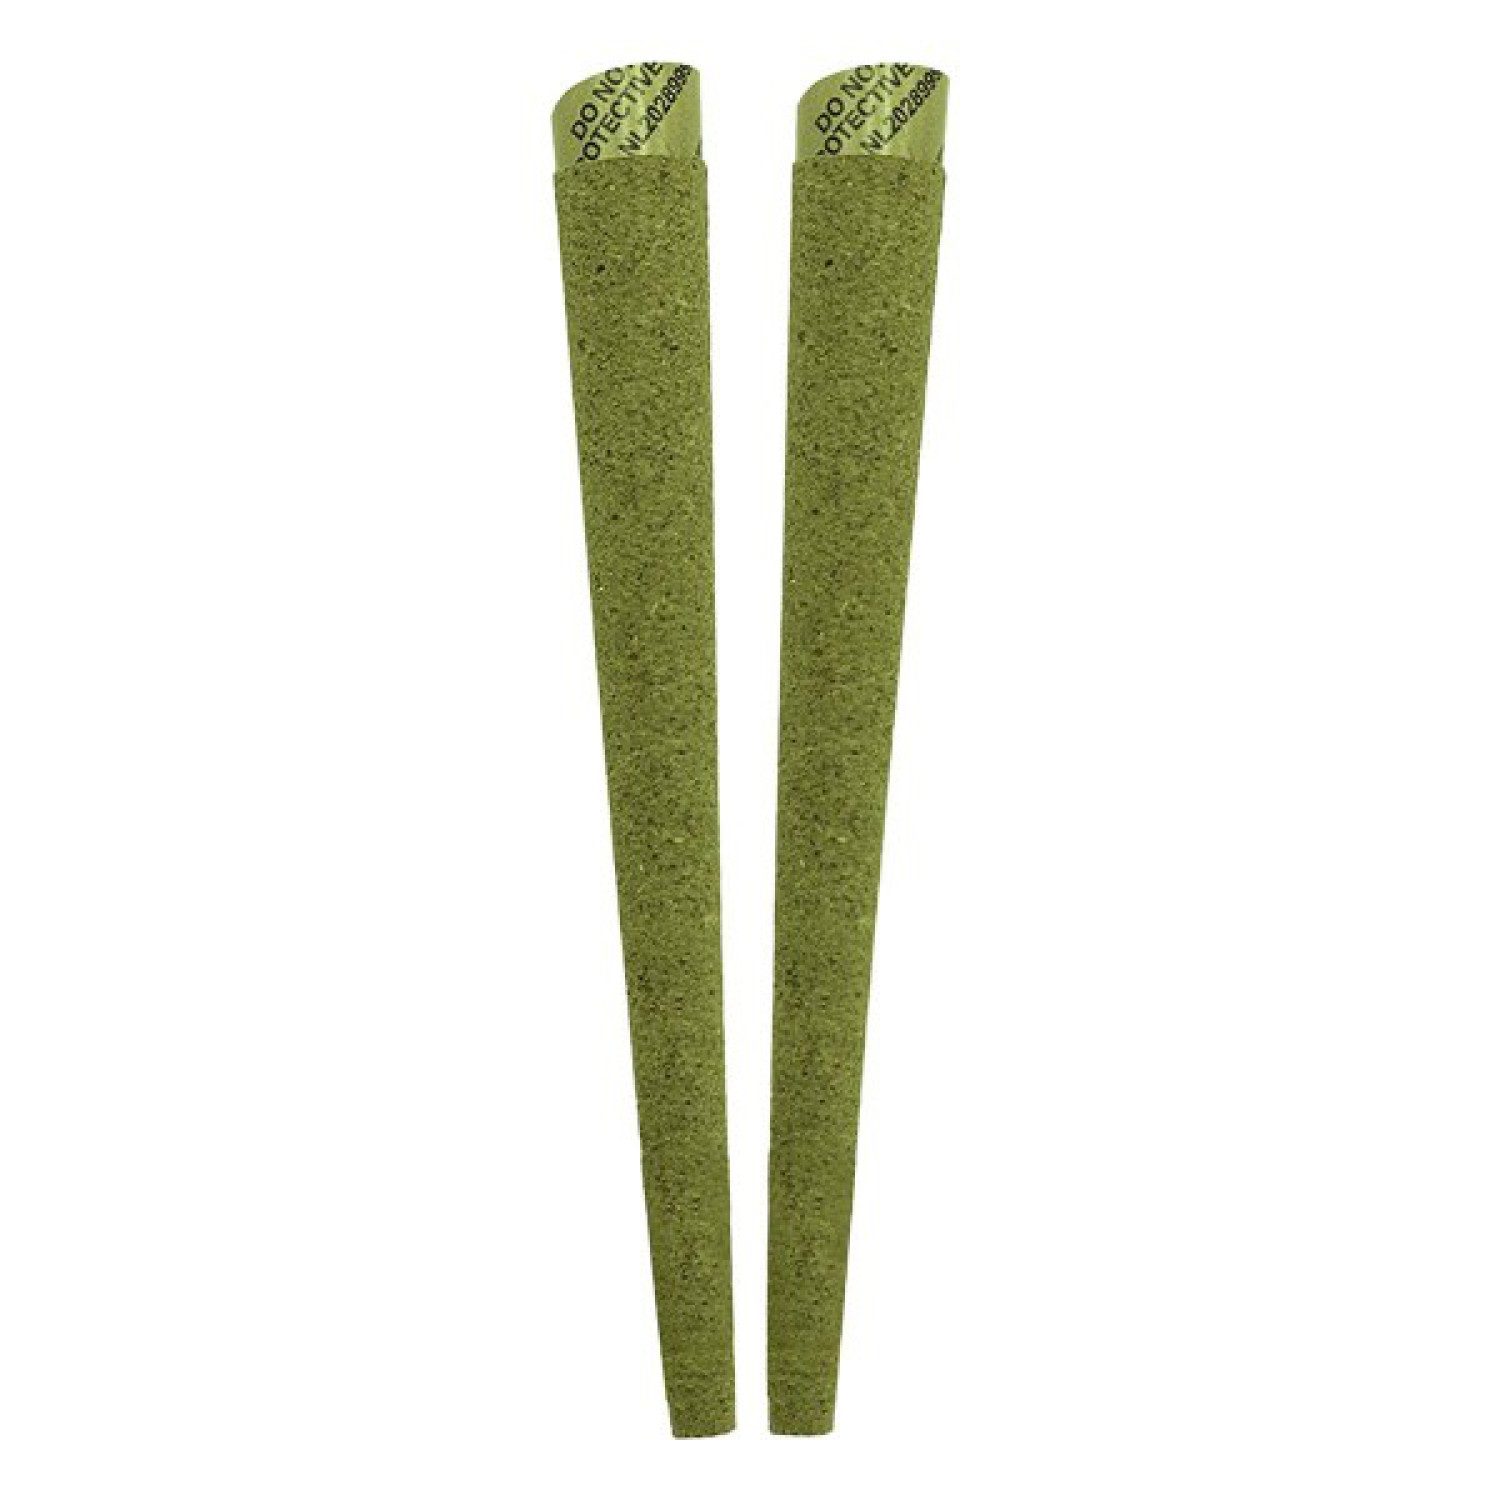 G Rollz | Banksy's Graffiti - 2x 'All Natural' Pre-rolled Hemp Cones (12 pack Display, 24 wraps)